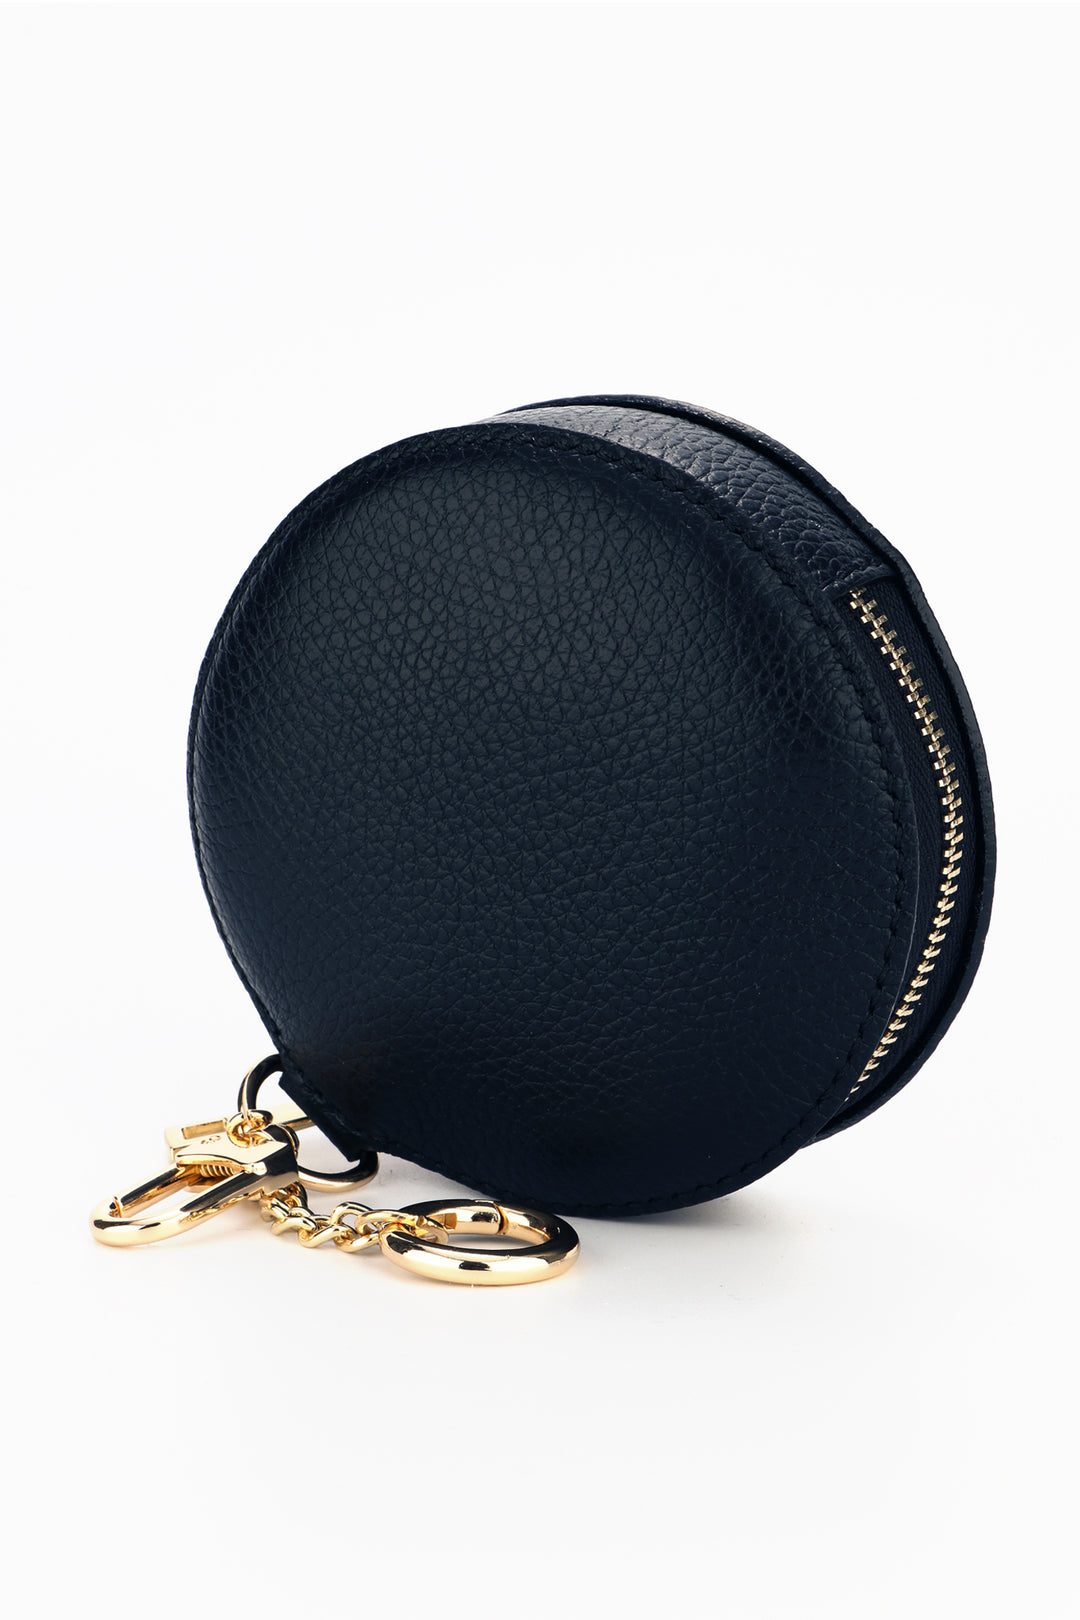 round navy blue leather coin purse with gold zip closure and gold keyring attachments